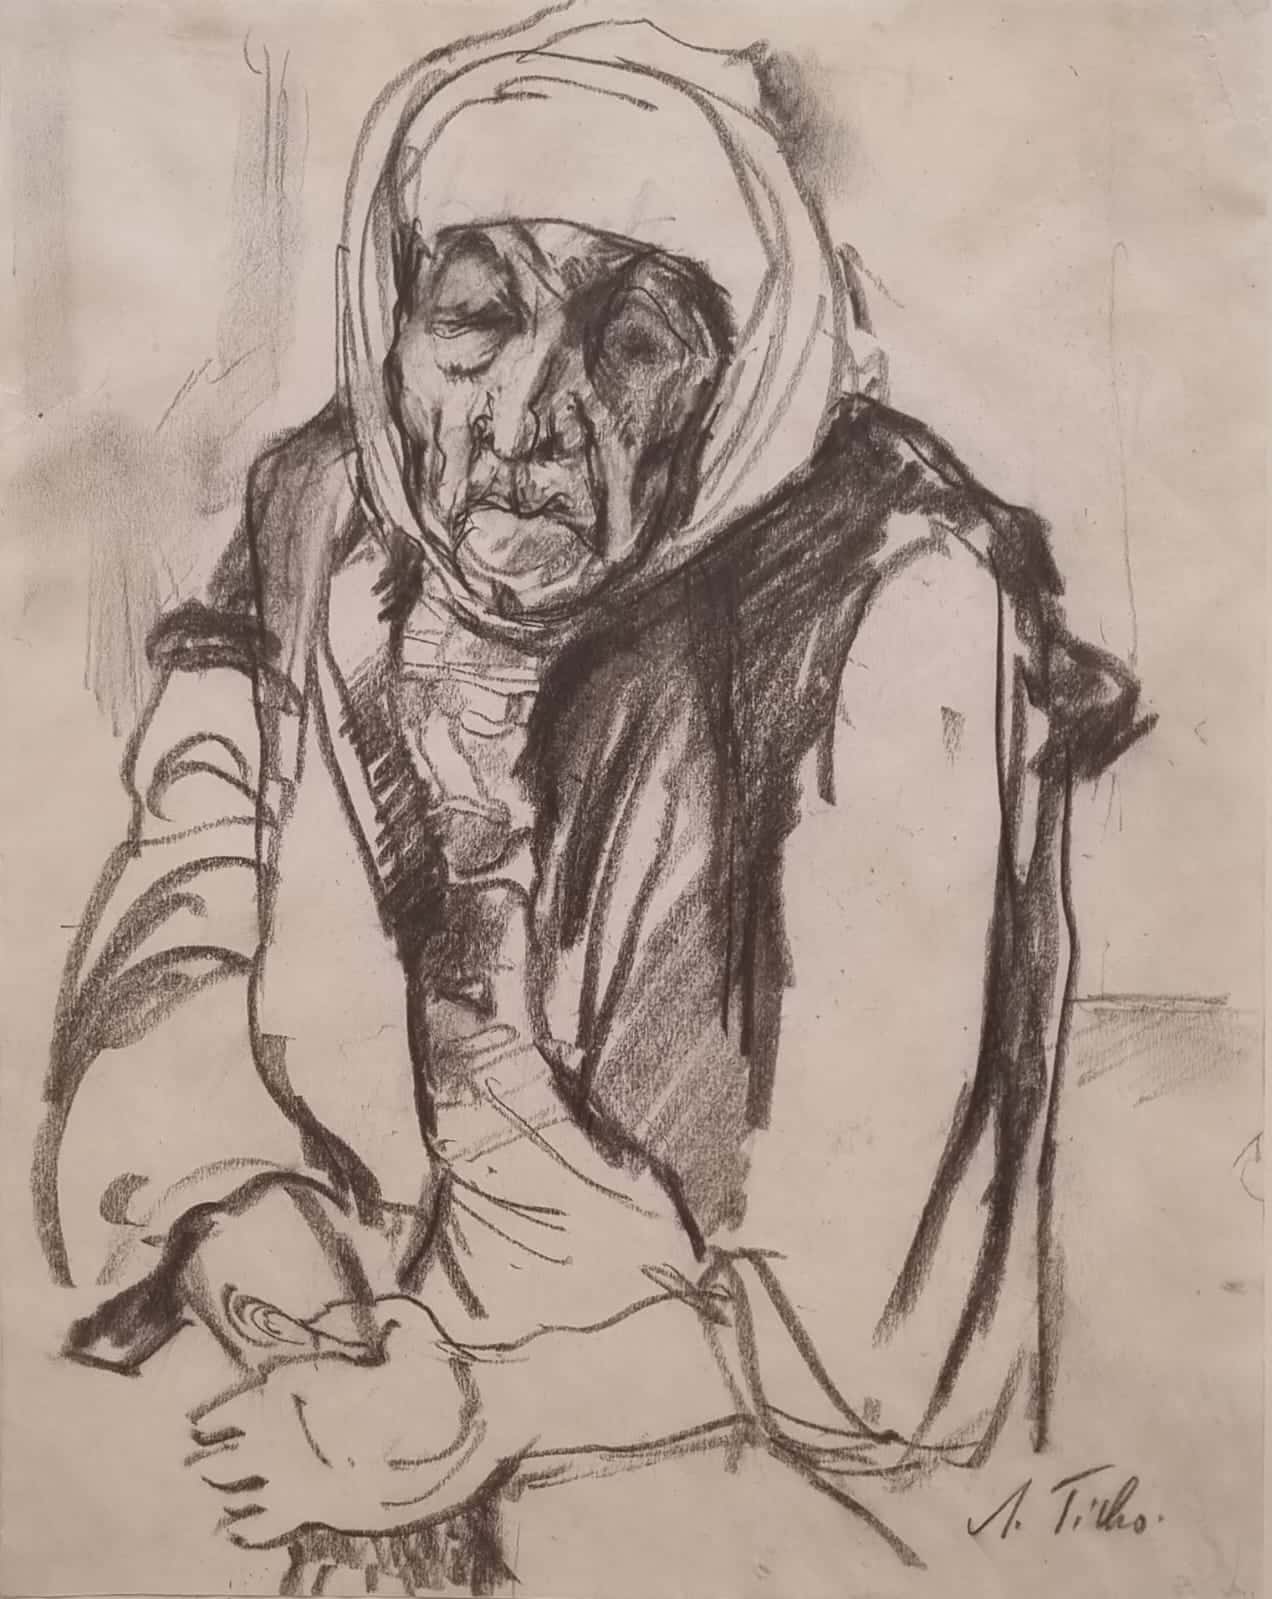 Anna Ticho - Old woman - Charcoal on paper - 27x22 cm